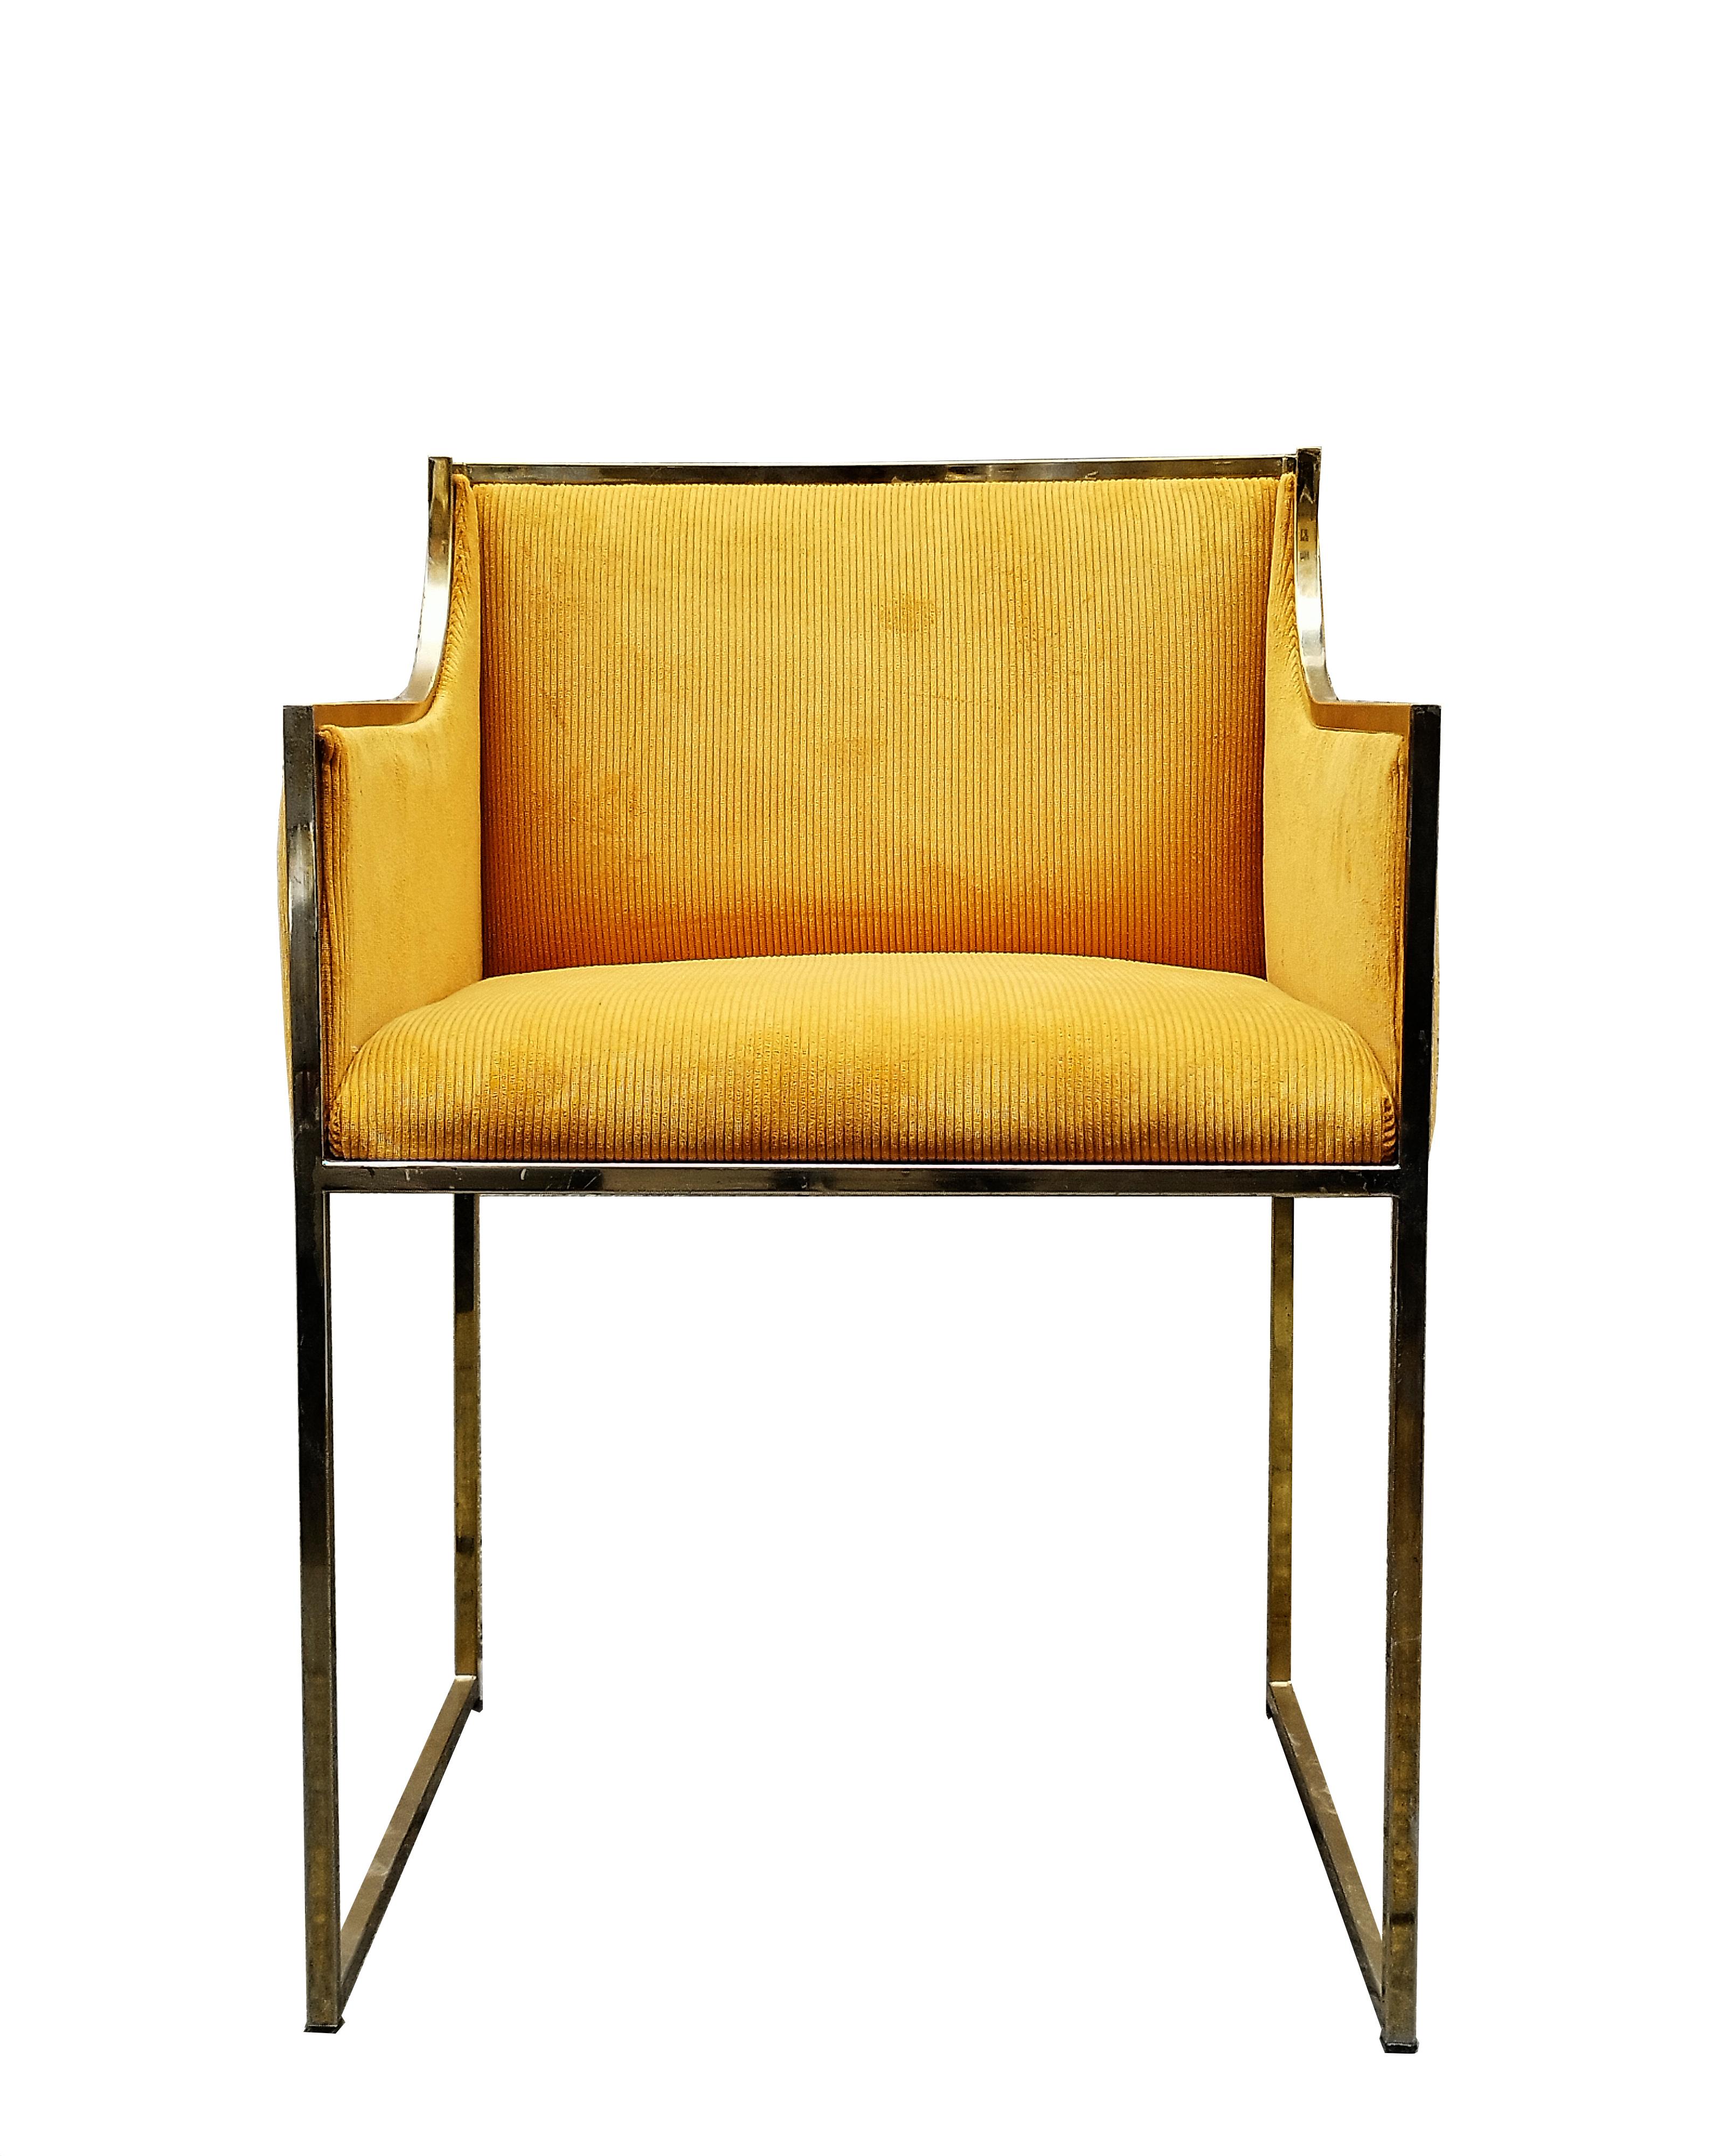 Delightful poltro ncina attributed to Willy Rizzo with a frame made of and upholstery in yellow corduroy.
The frame shows some marks consistent with age and use.